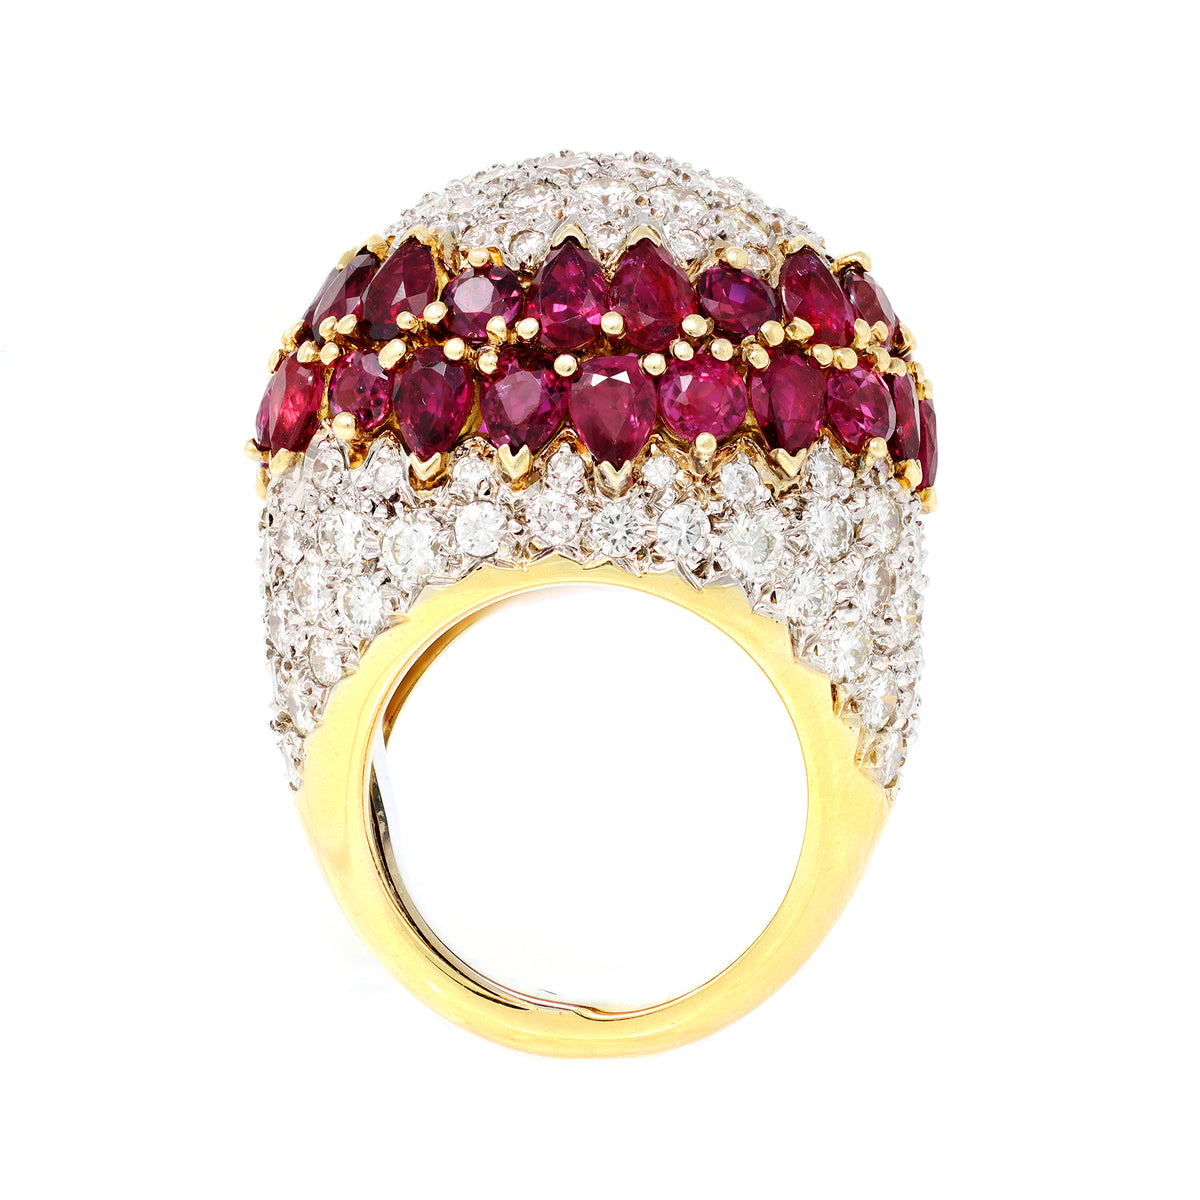 Important Diamond and Ruby Dome Cocktail Ring 18 Karat circa 1970 front view